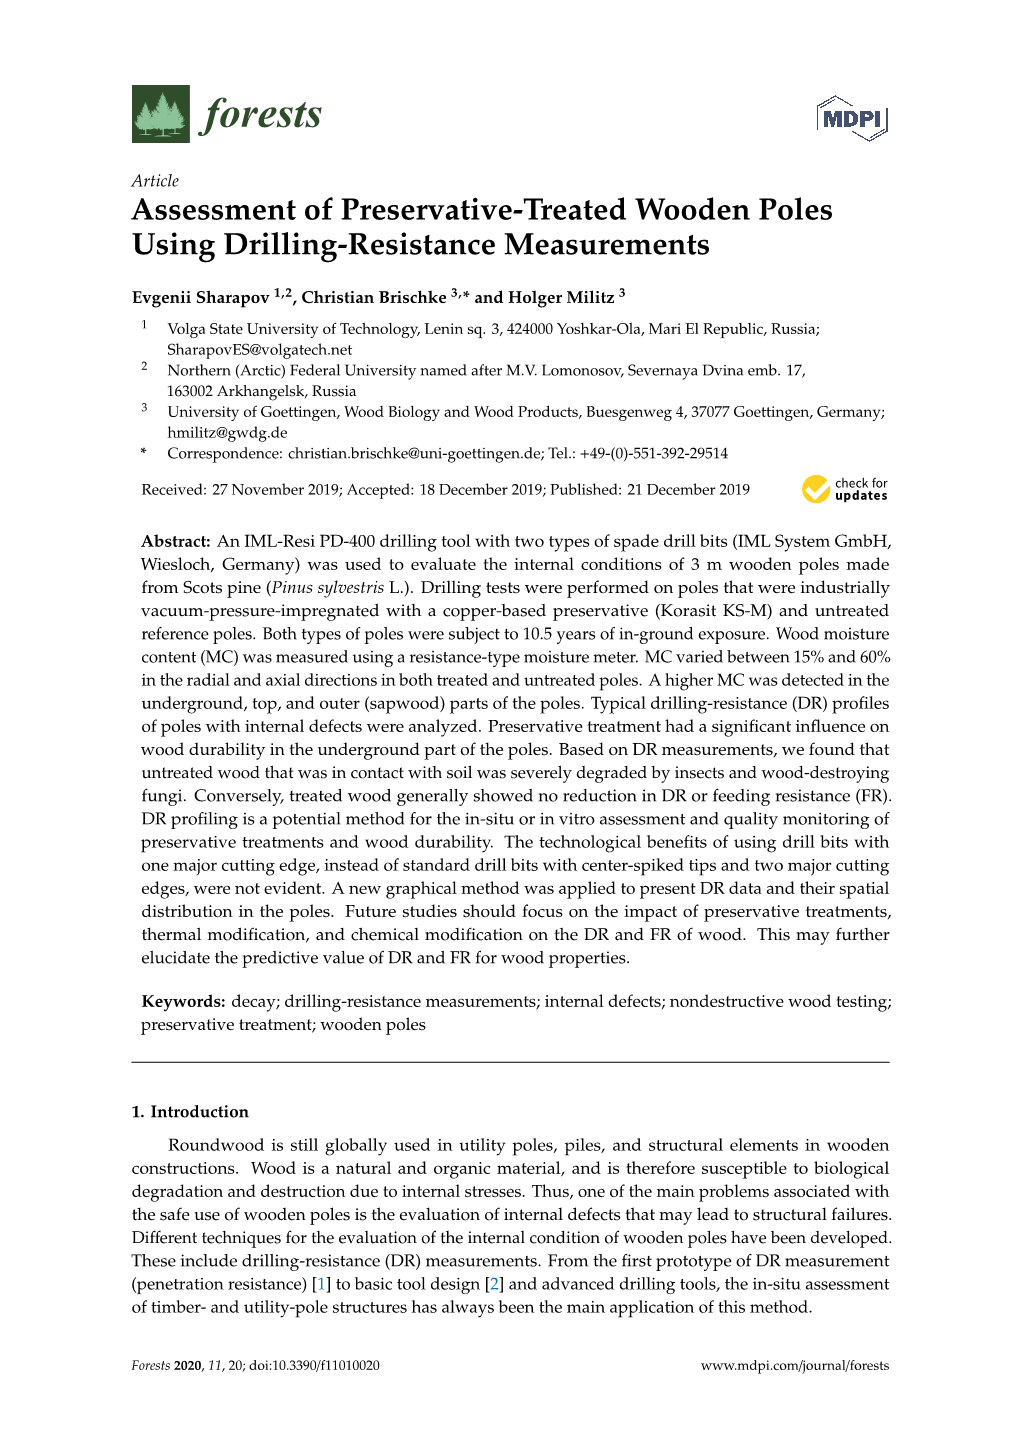 Assessment of Preservative-Treated Wooden Poles Using Drilling-Resistance Measurements